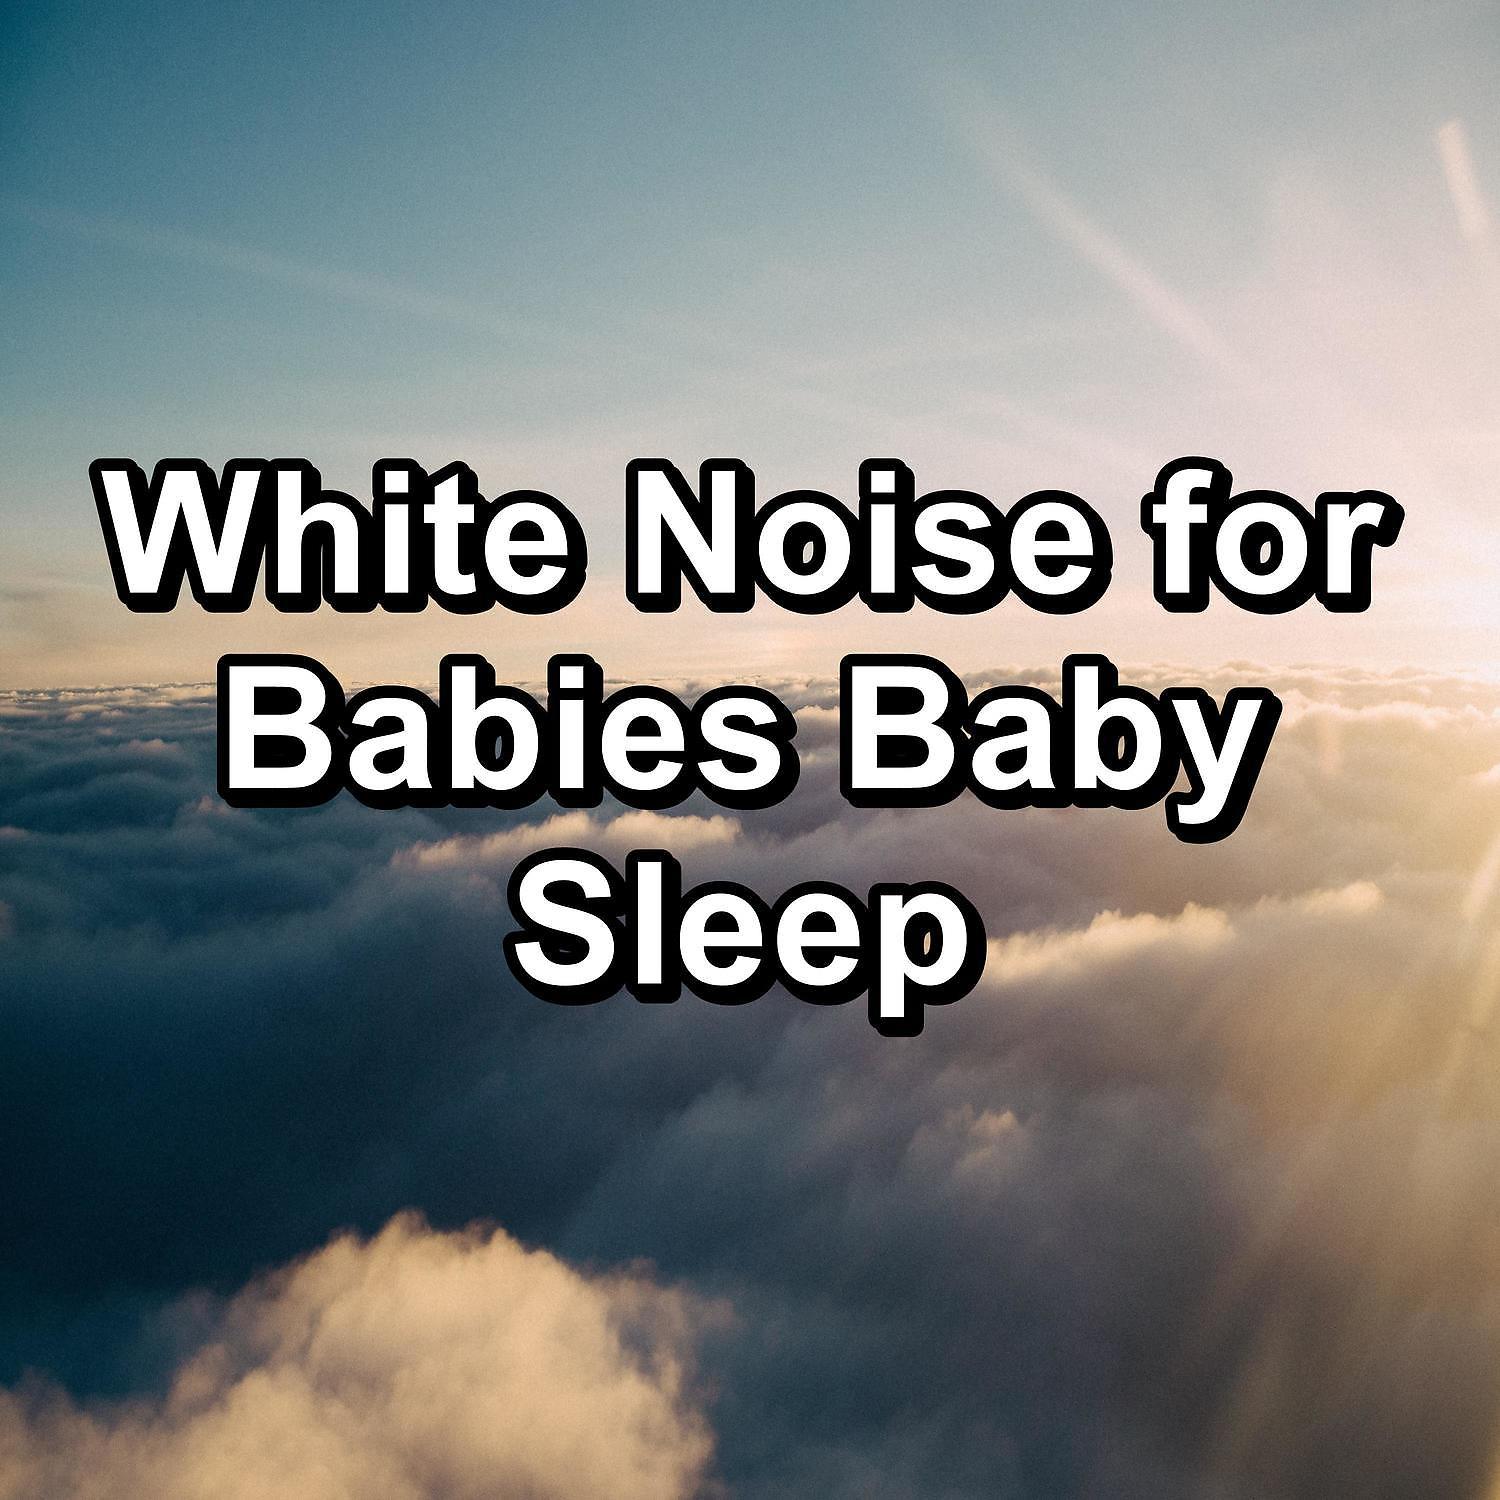 Brown Noise Sound, White Noise Sound, Pink Noise Sound - Pure Fan Sound to Relax with To Help your Babies Sleep